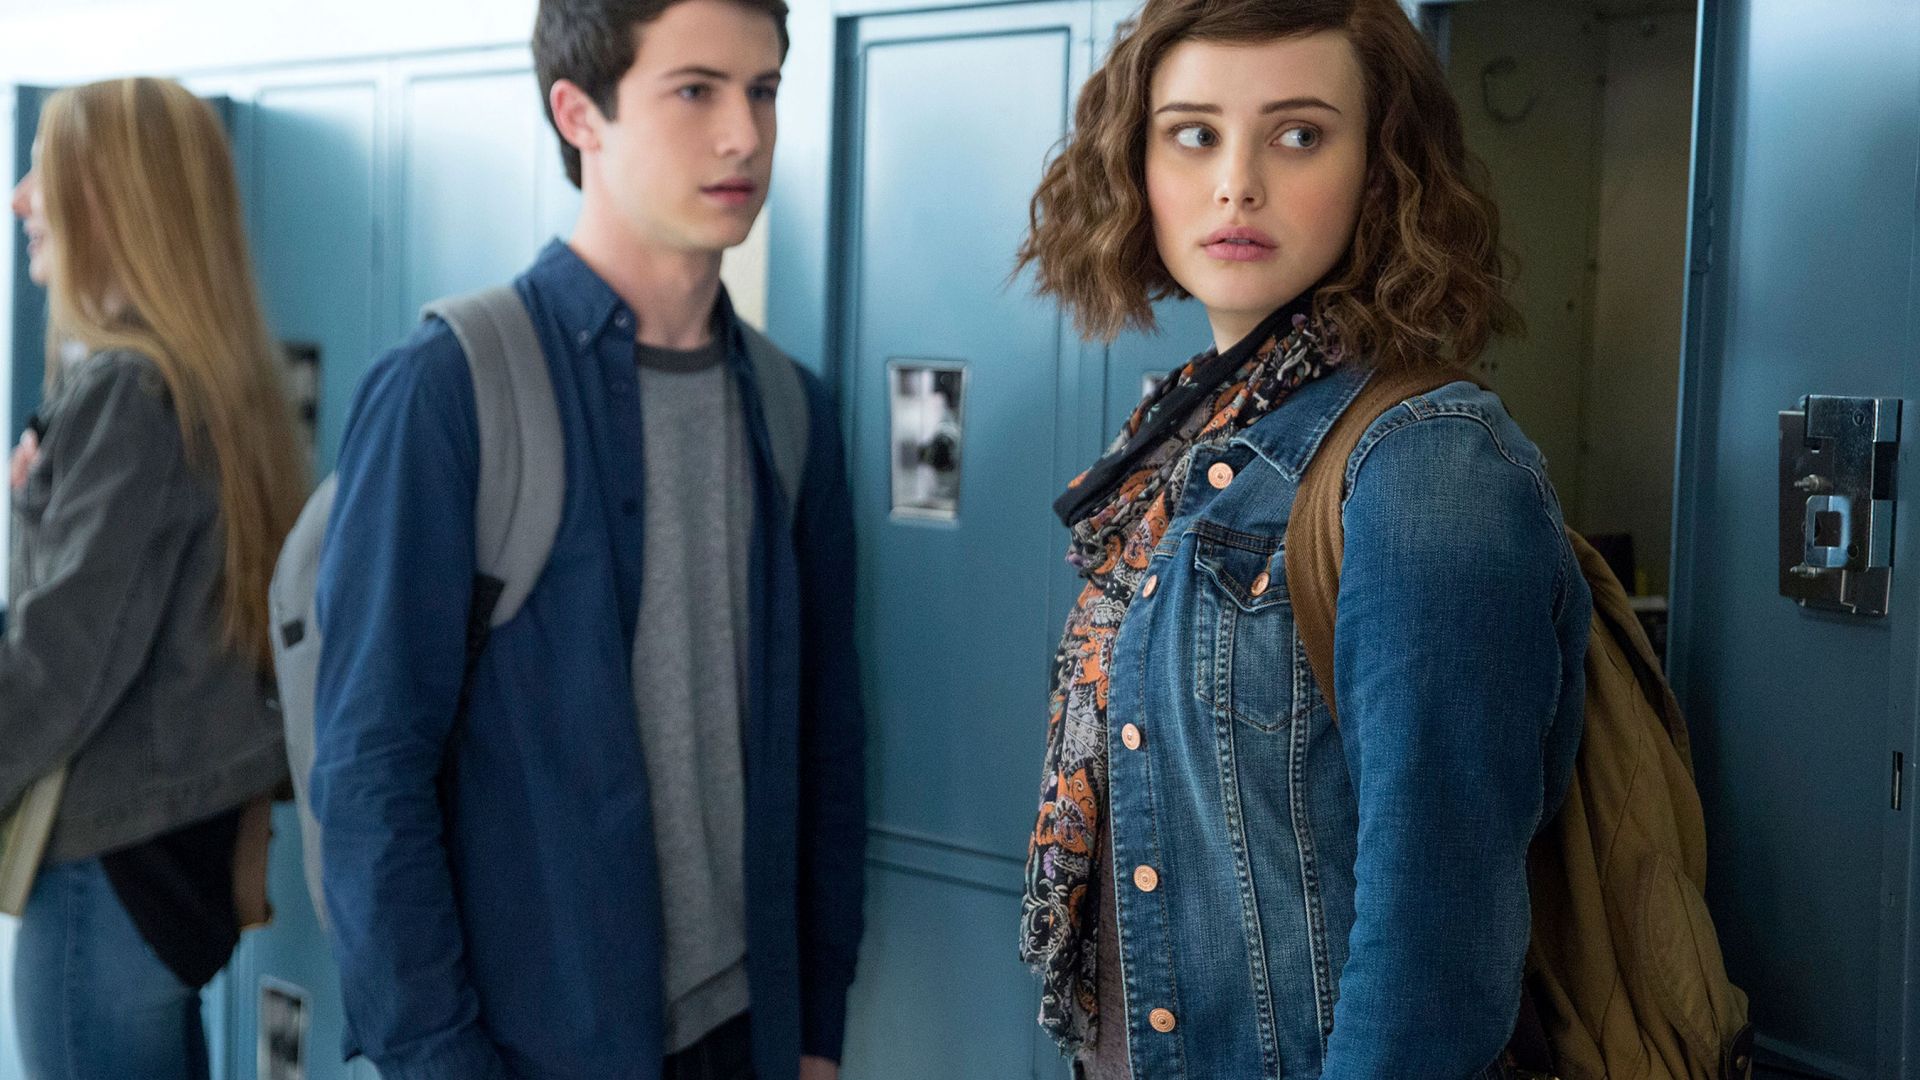 Wallpaper 13 reasons why, TV show, Katherine & Dylan